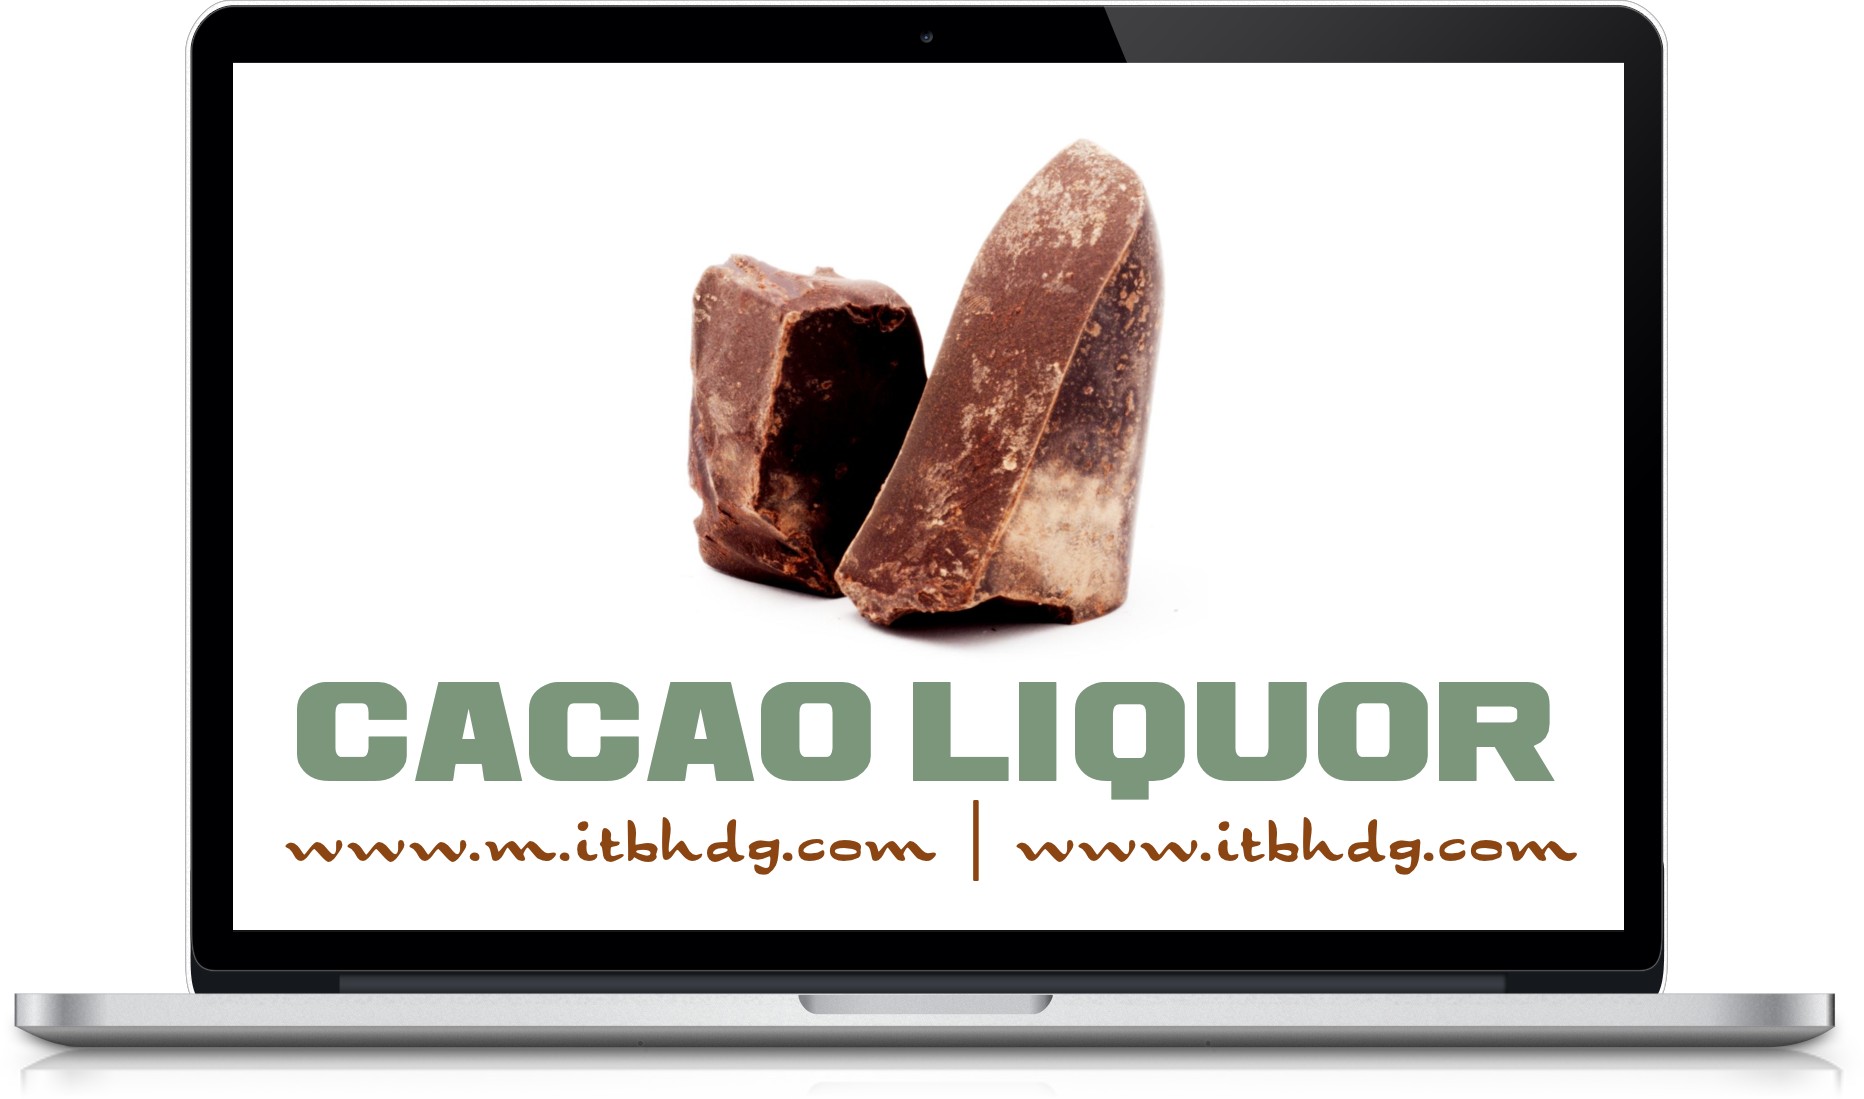 Save Time and Money, Shop Here for Cacao, Cocoa Products